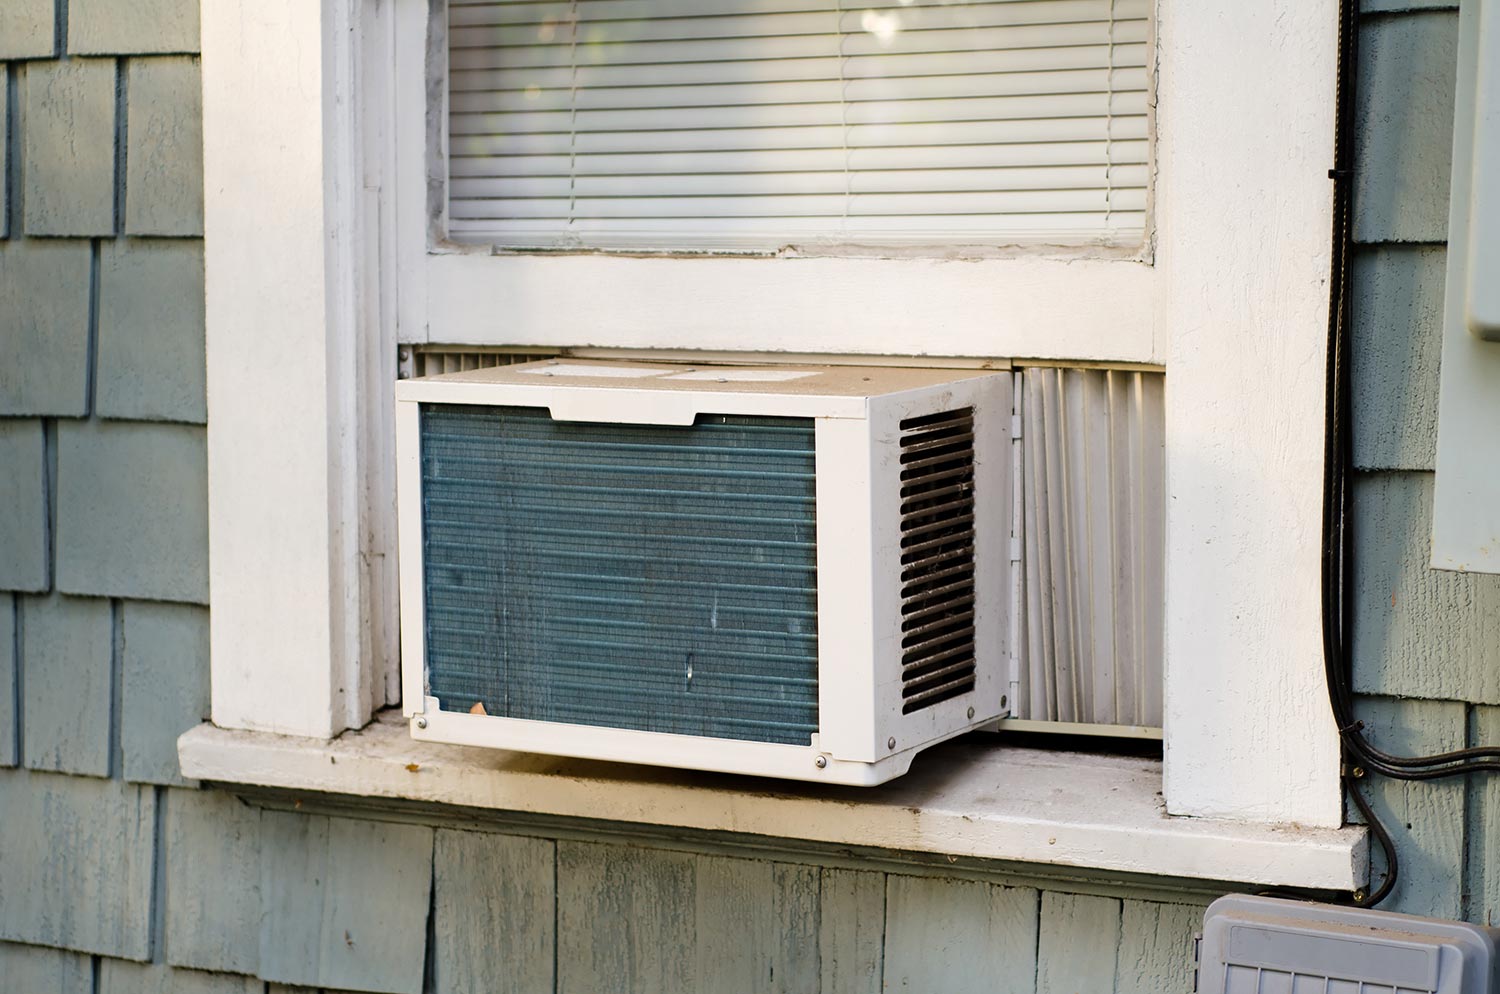 Air conditioning unit sticking out a window